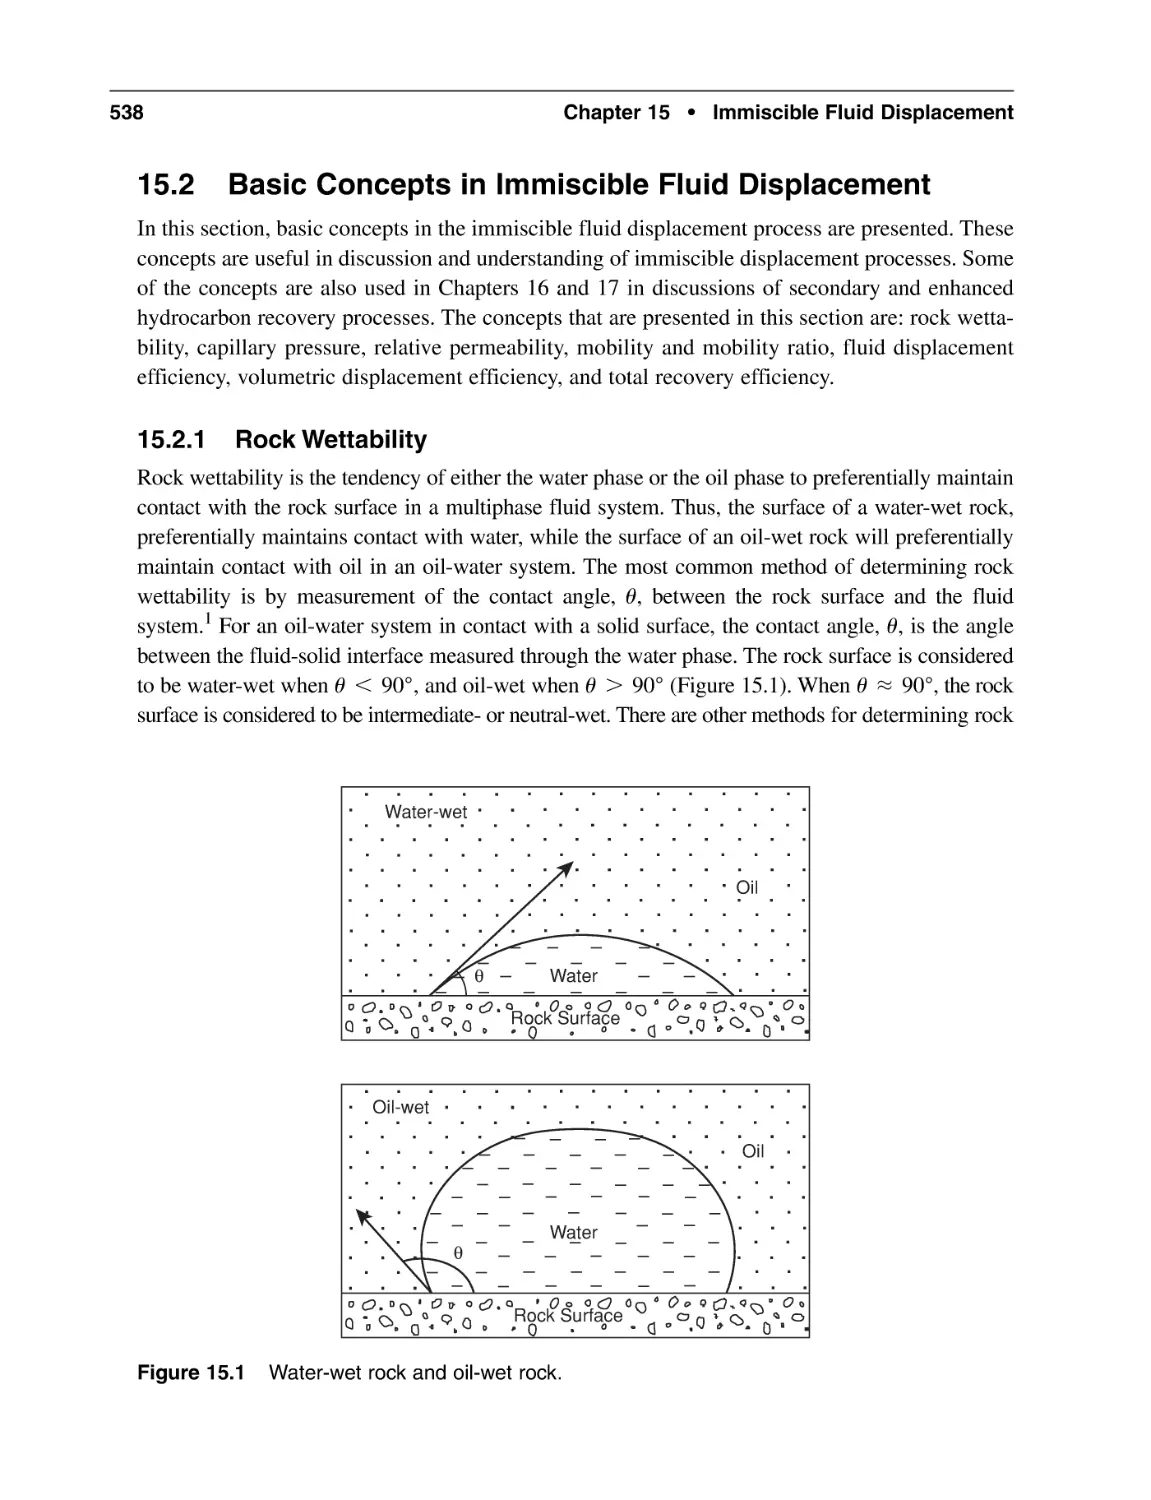 15.2 Basic Concepts in Immiscible Fluid Displacement
15.2.1 Rock Wettability